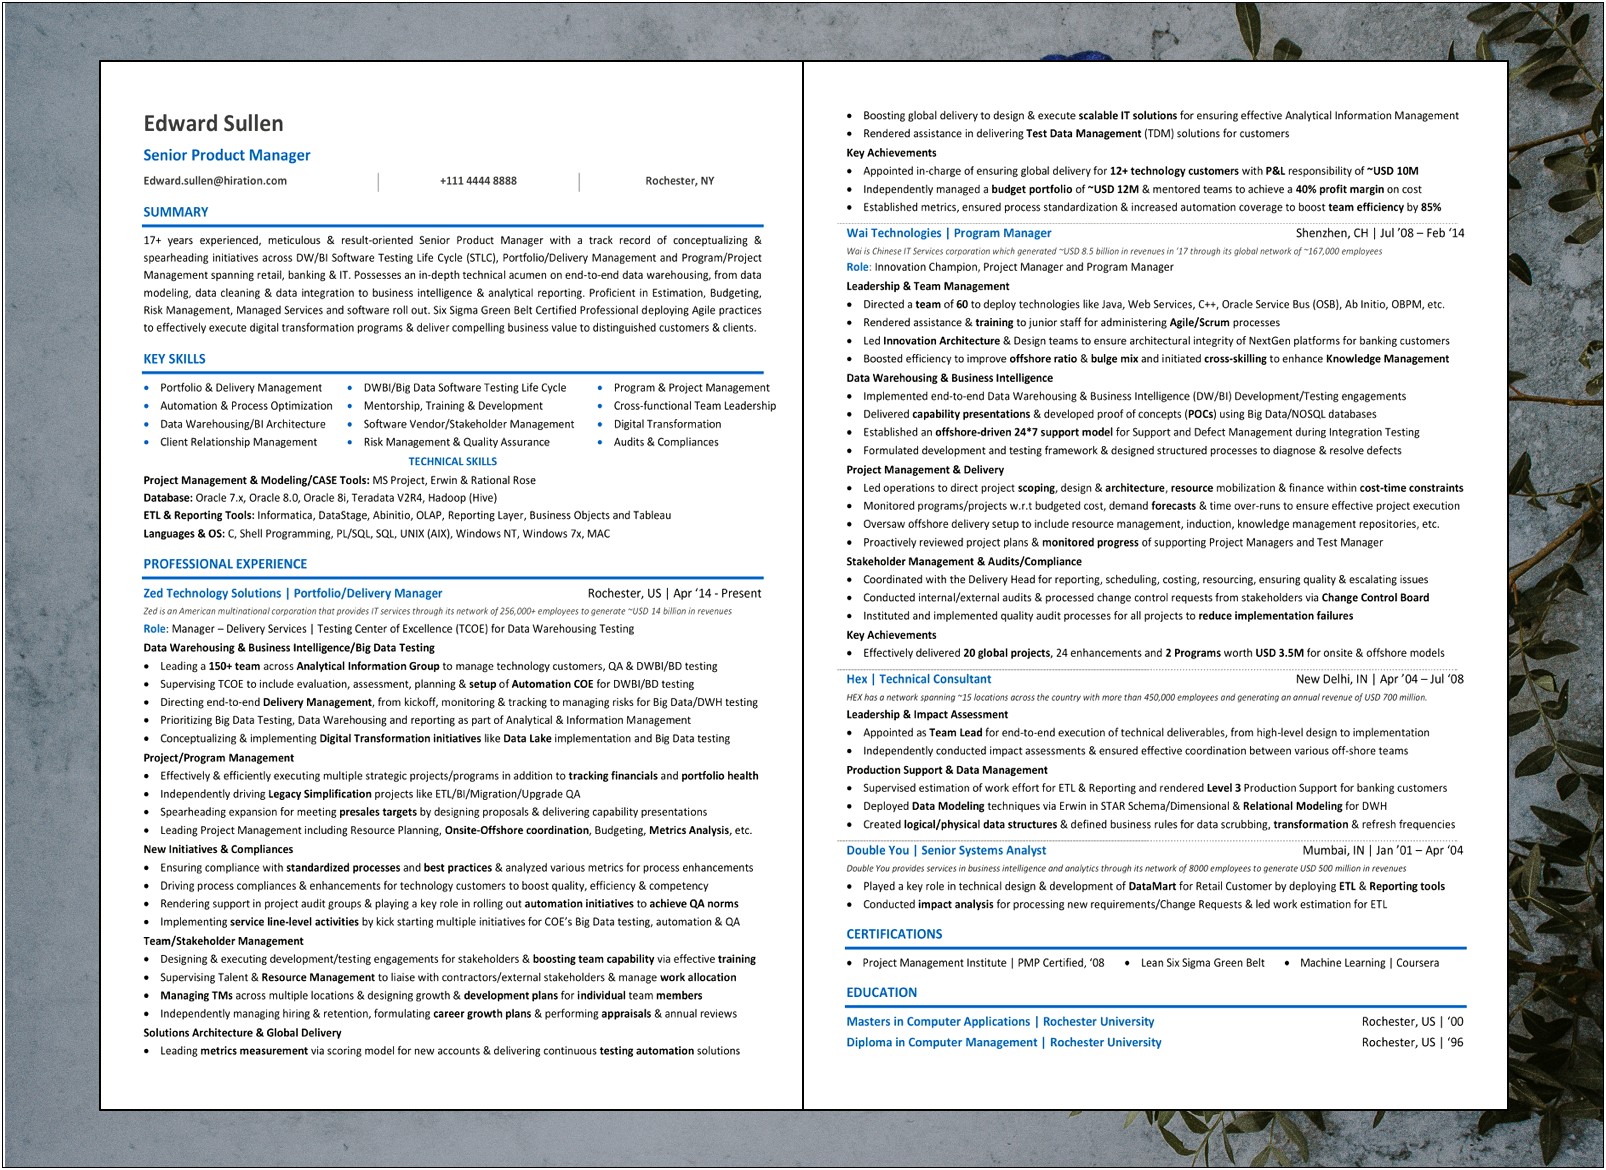 Best Vp Of Product Management Resumes